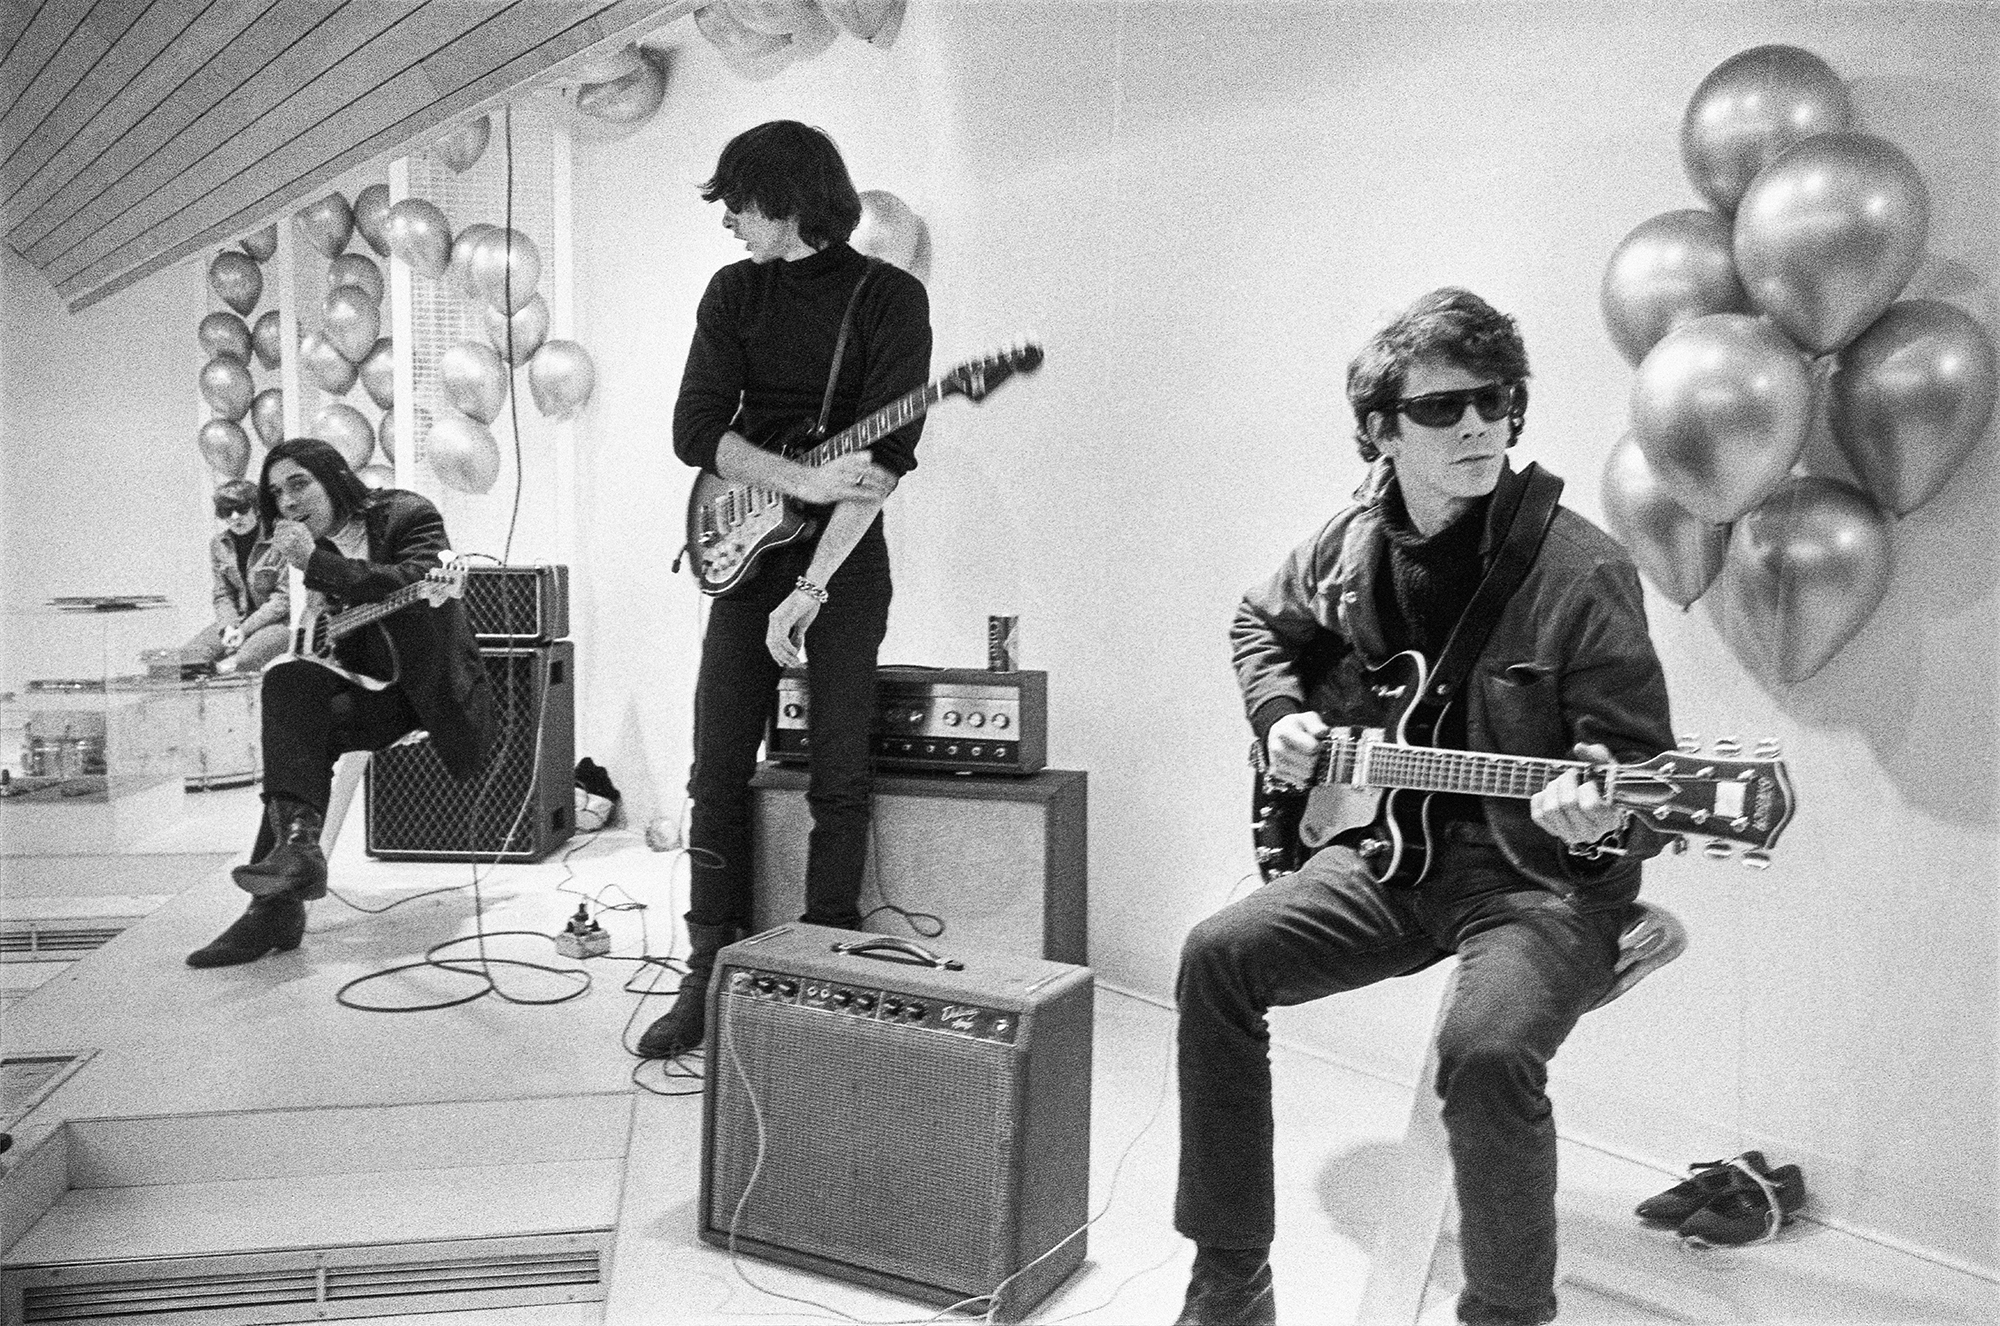 Moe Tucker, John Cale, Sterling Morrison and Lou Reed from archival photography from The Velvet Underground